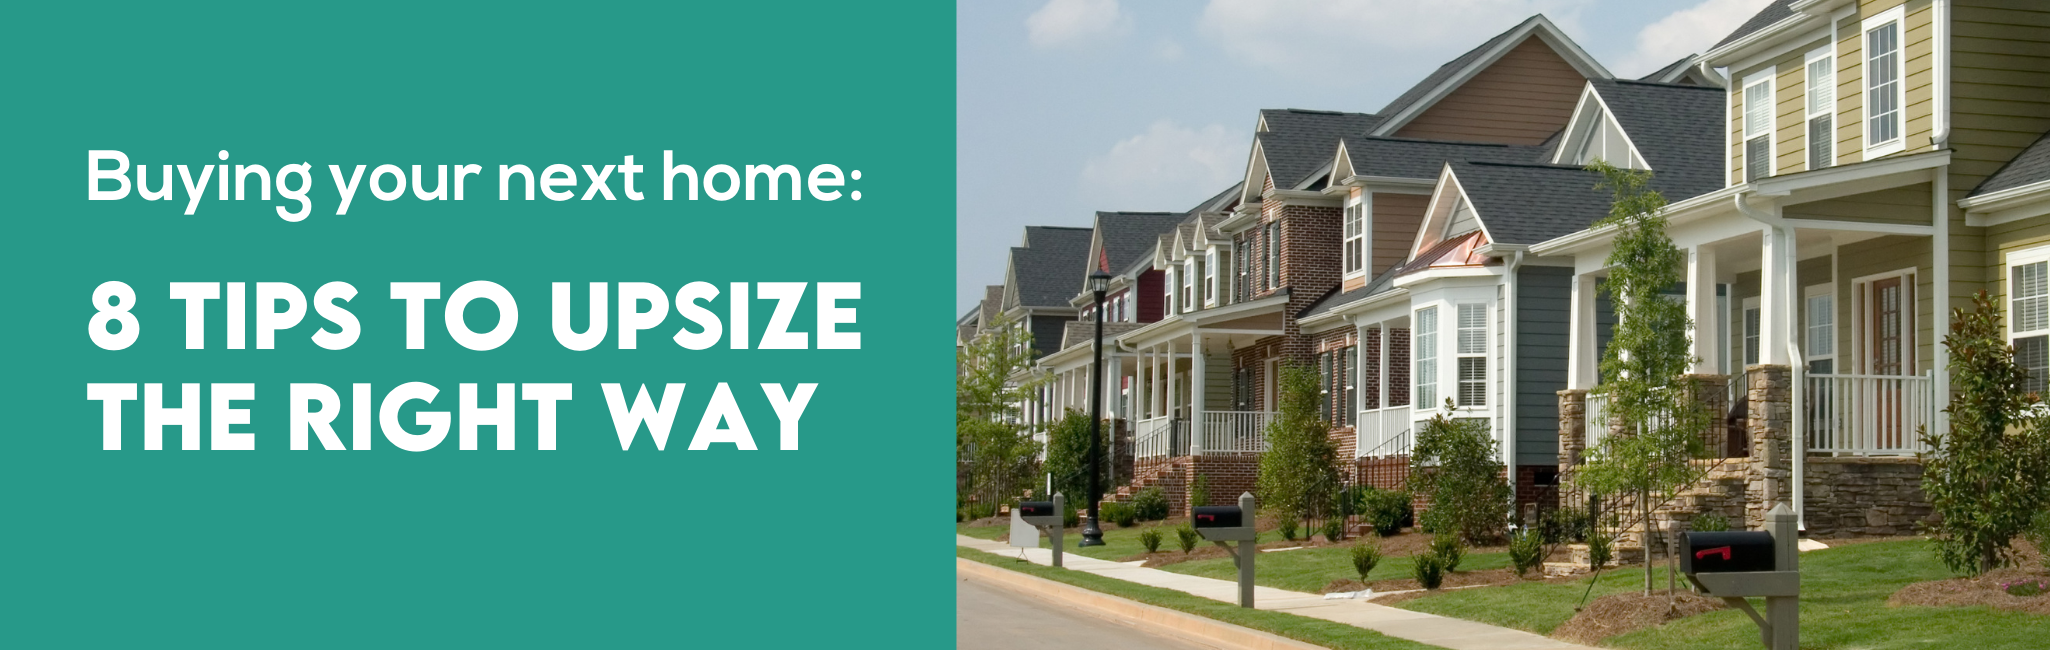 8 tips to upsize a home purchase